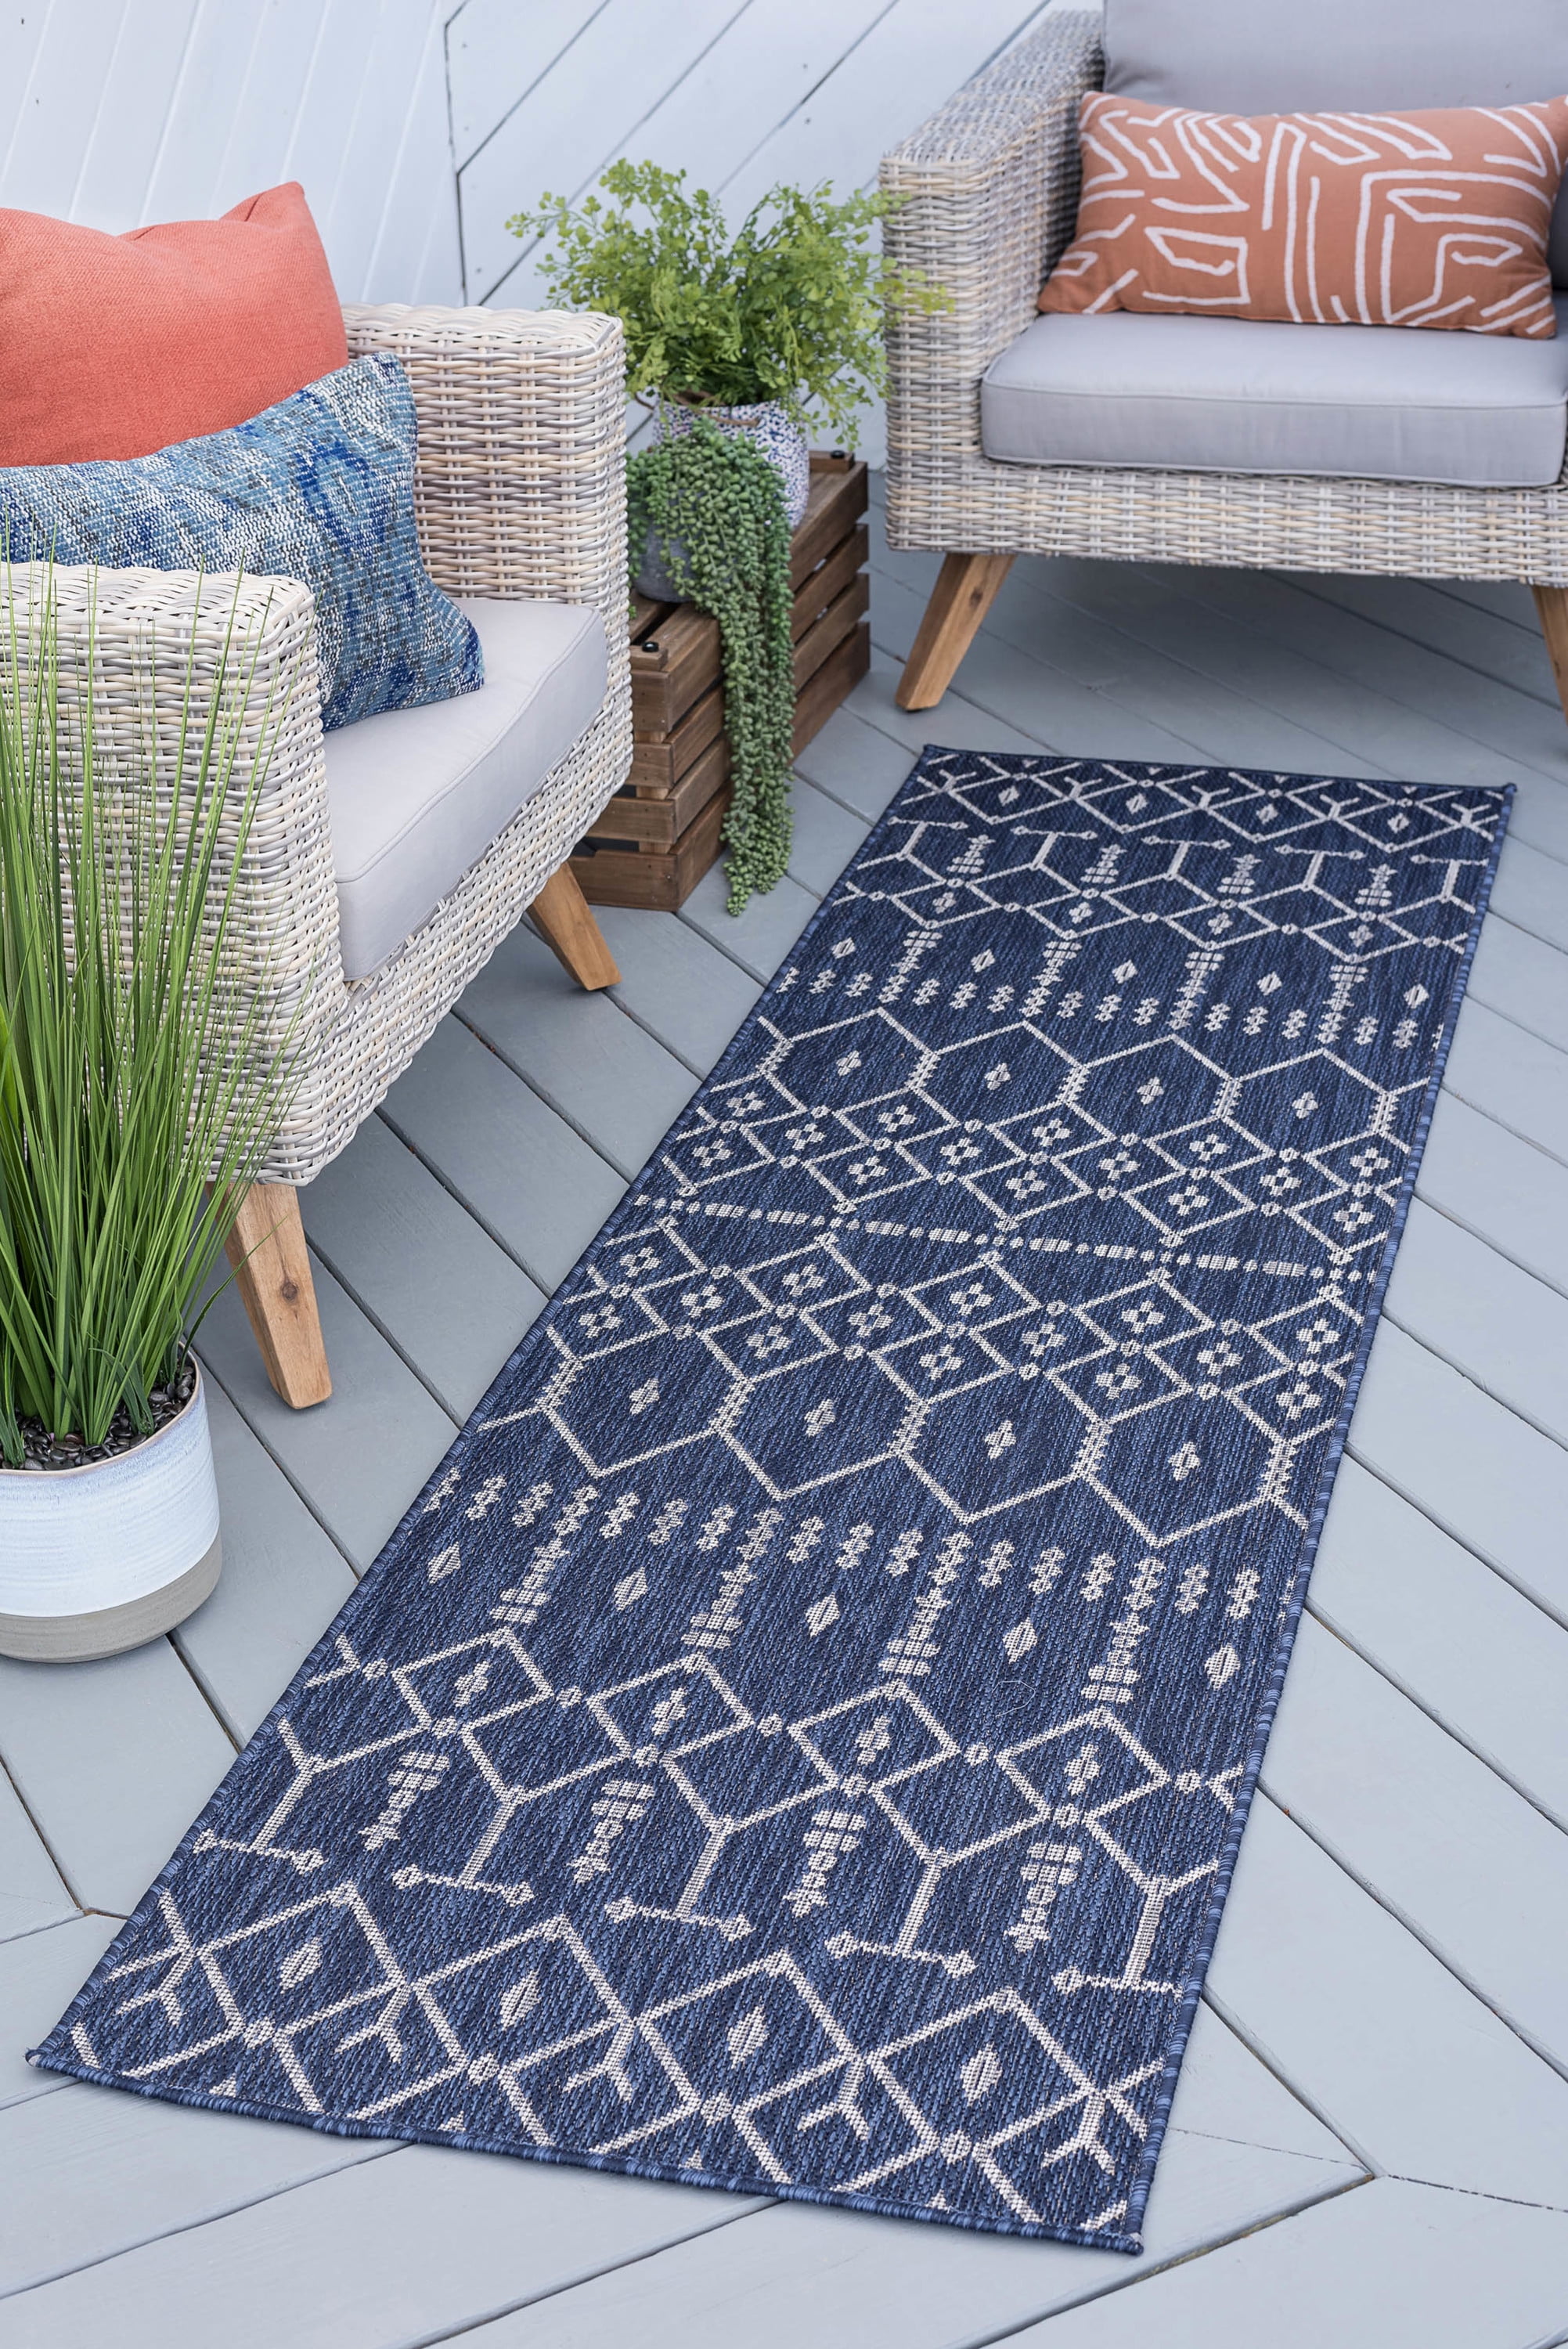 2x8 Water Resistant, Indoor Outdoor Runner Rugs for Patios, Hallway,  Entryway, Deck, Porch, Balcony or Kitchen, Outside Area Rug for Patio, Blue, Stripe